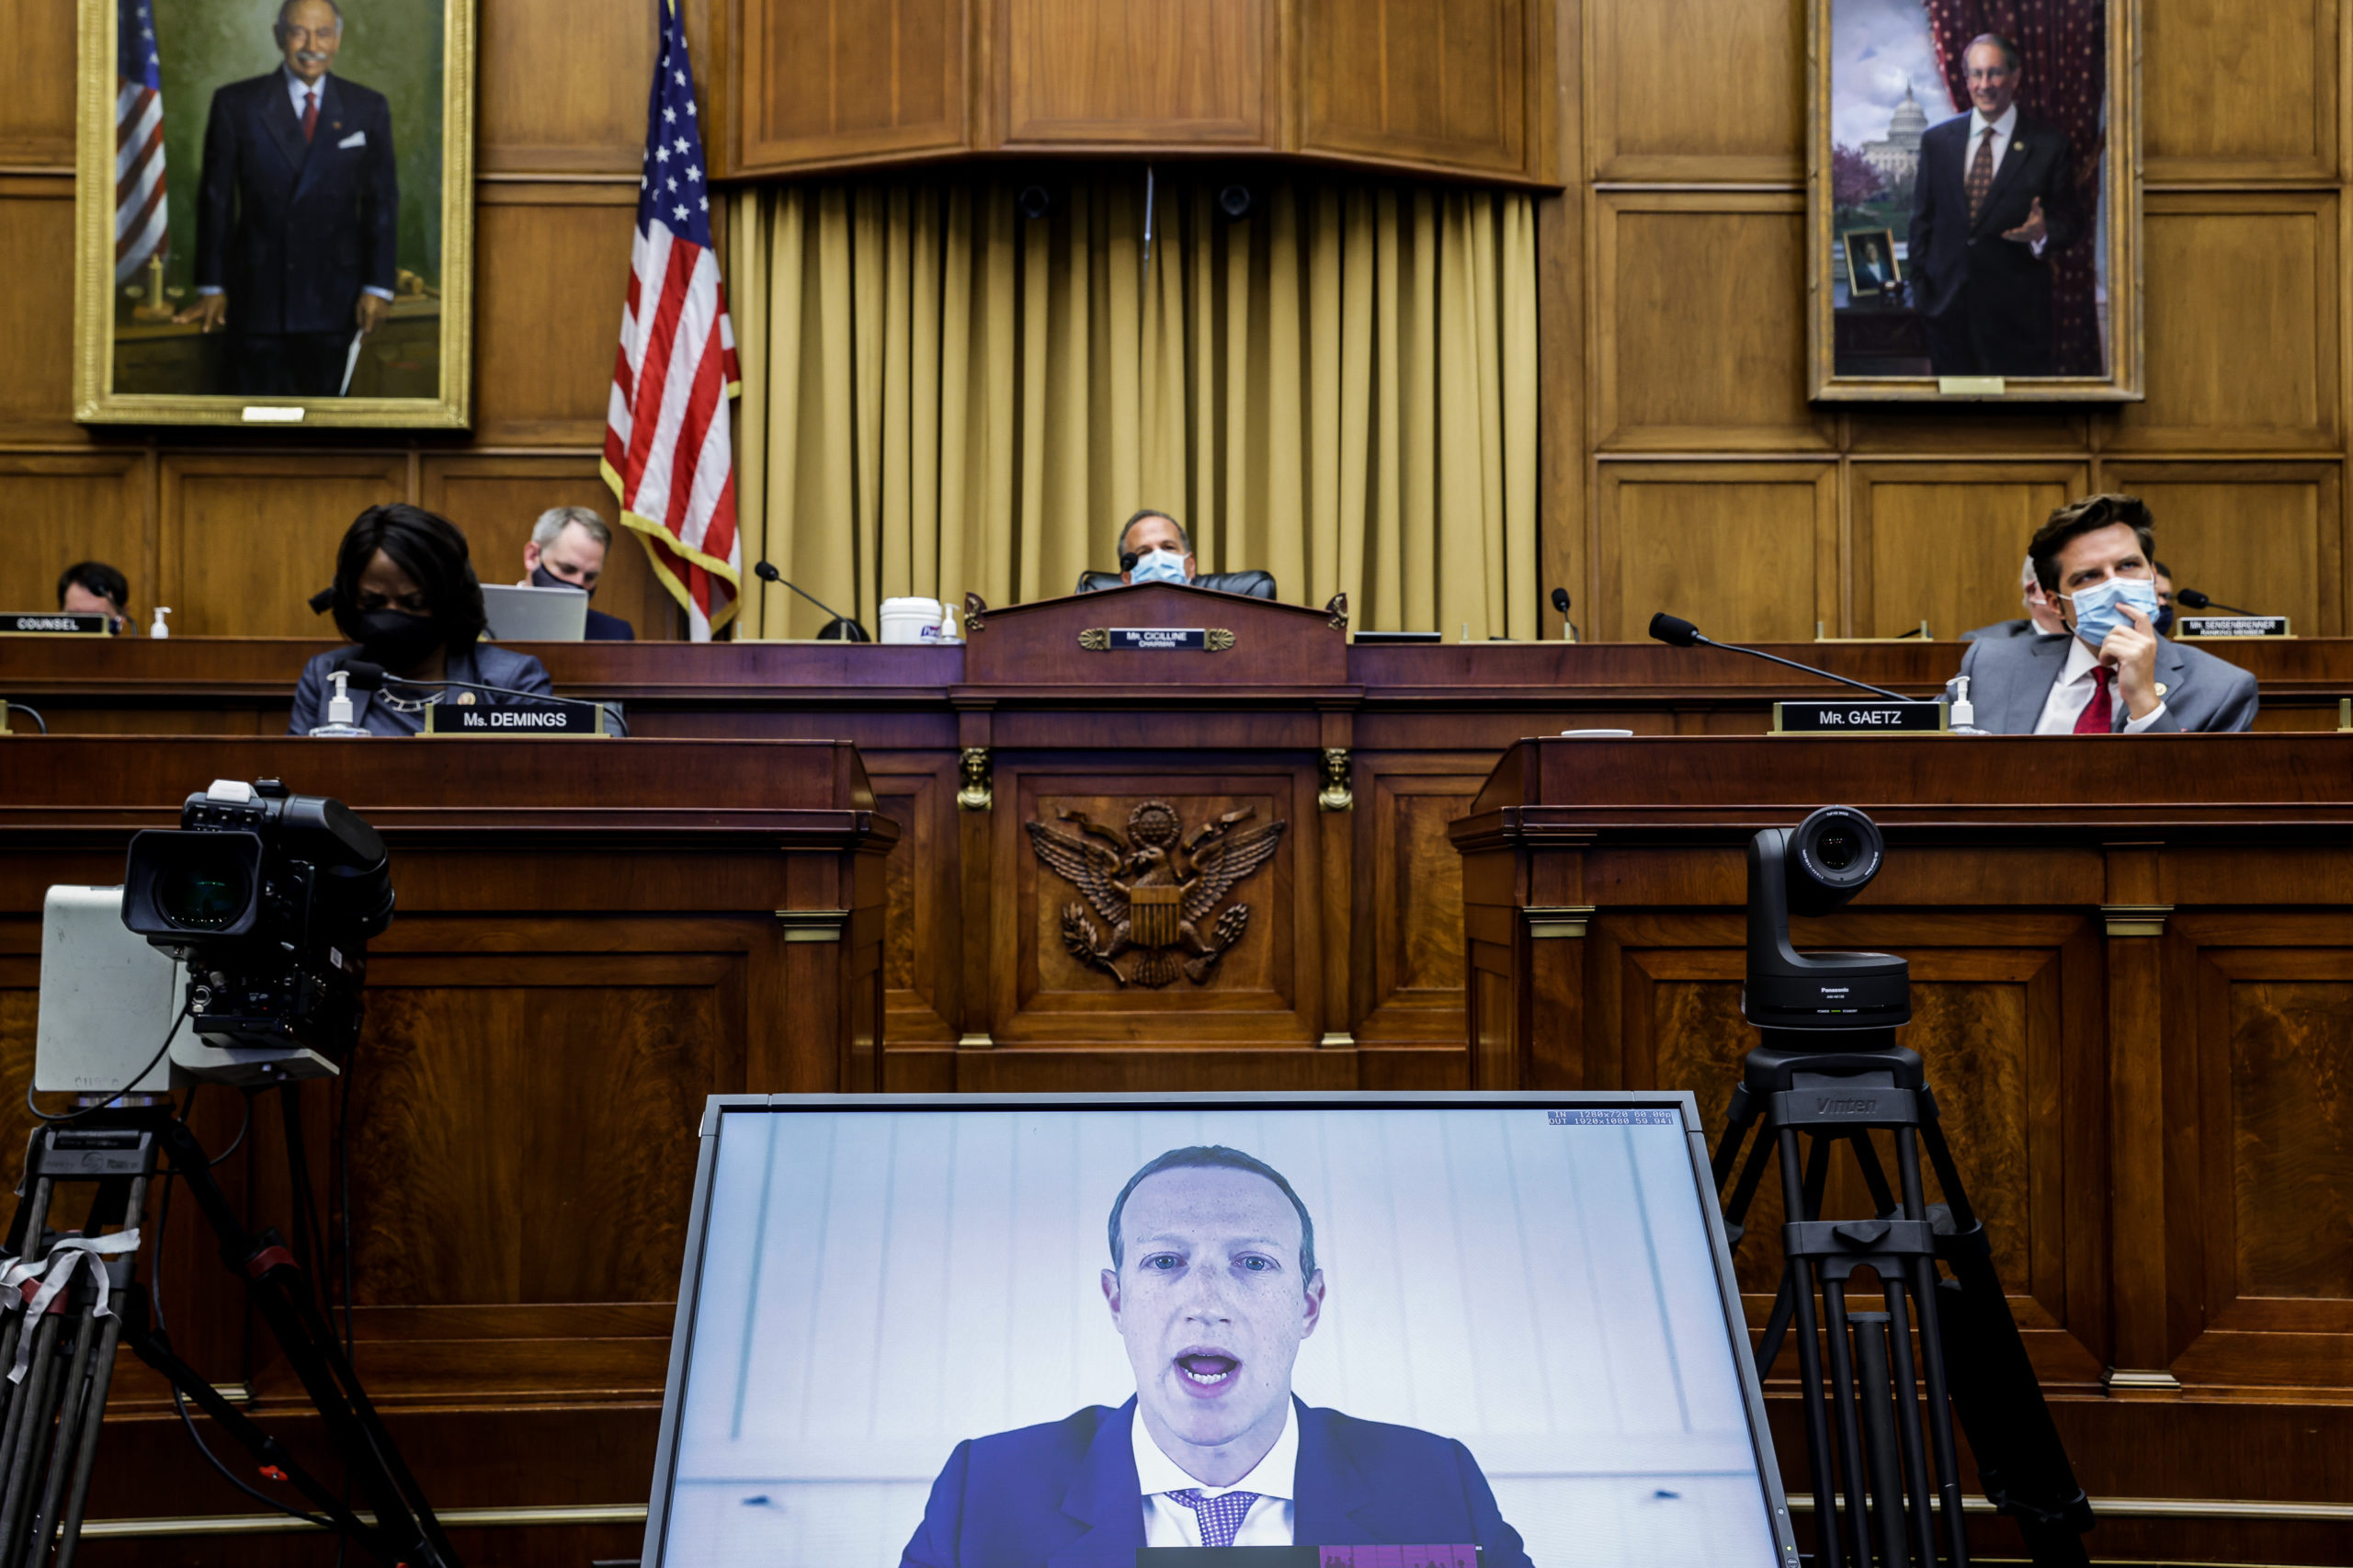 Facebook CEO Mark Zuckerberg speaks during a House hearing on July 29, 2020. (Graeme Jennings/Pool/Getty Images)